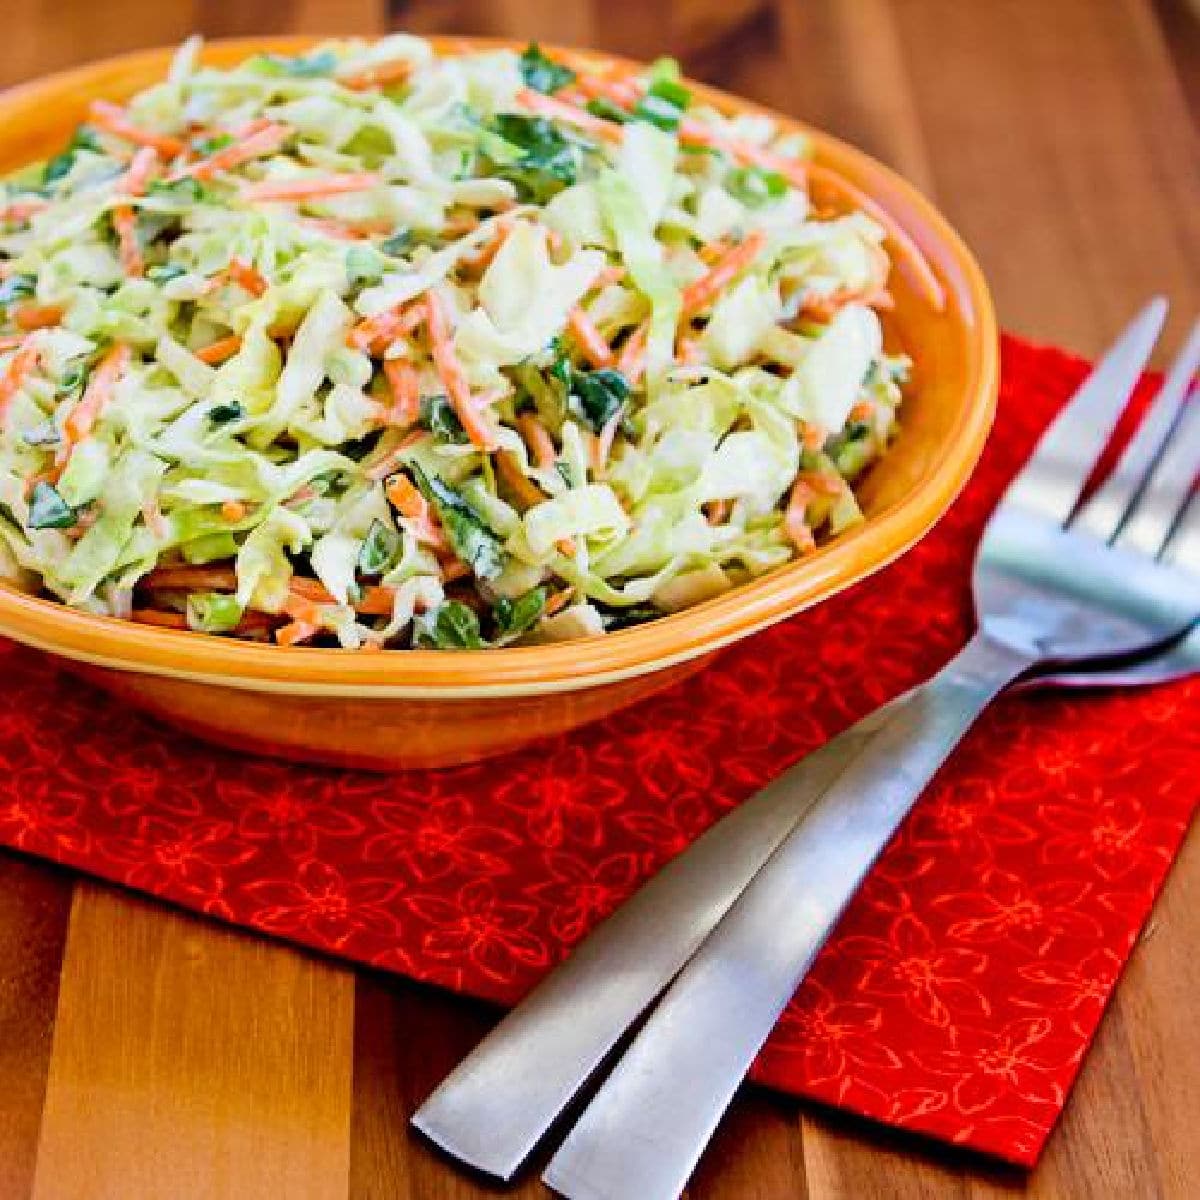 Square image of Moroccan Salad with Cabbage, Carrots, and Mint